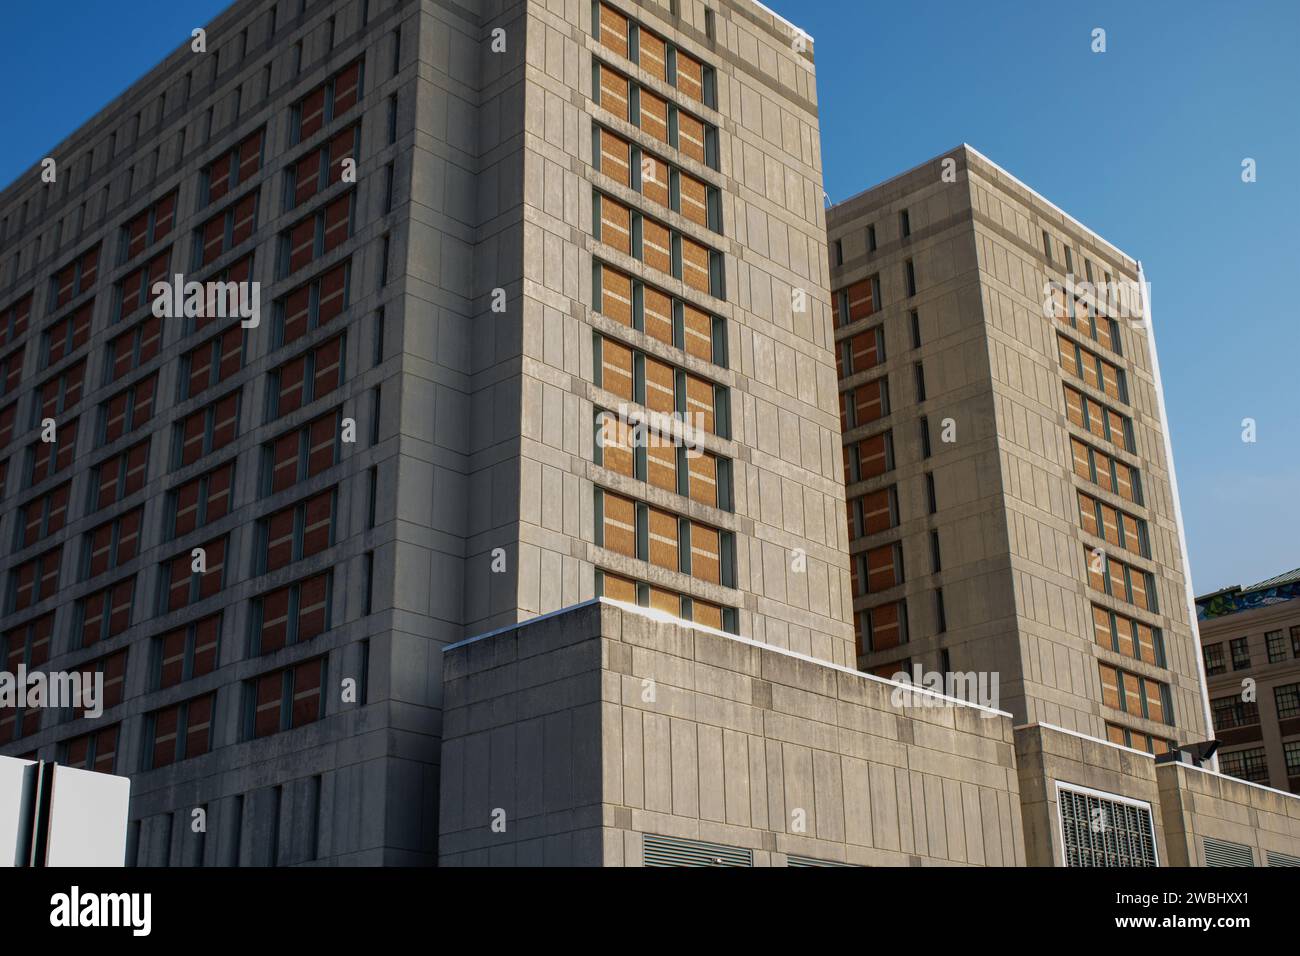 The exterior of the MDC Brooklyn Federal Bureau of Prisons located in Brooklyn, New York, USA Stock Photo